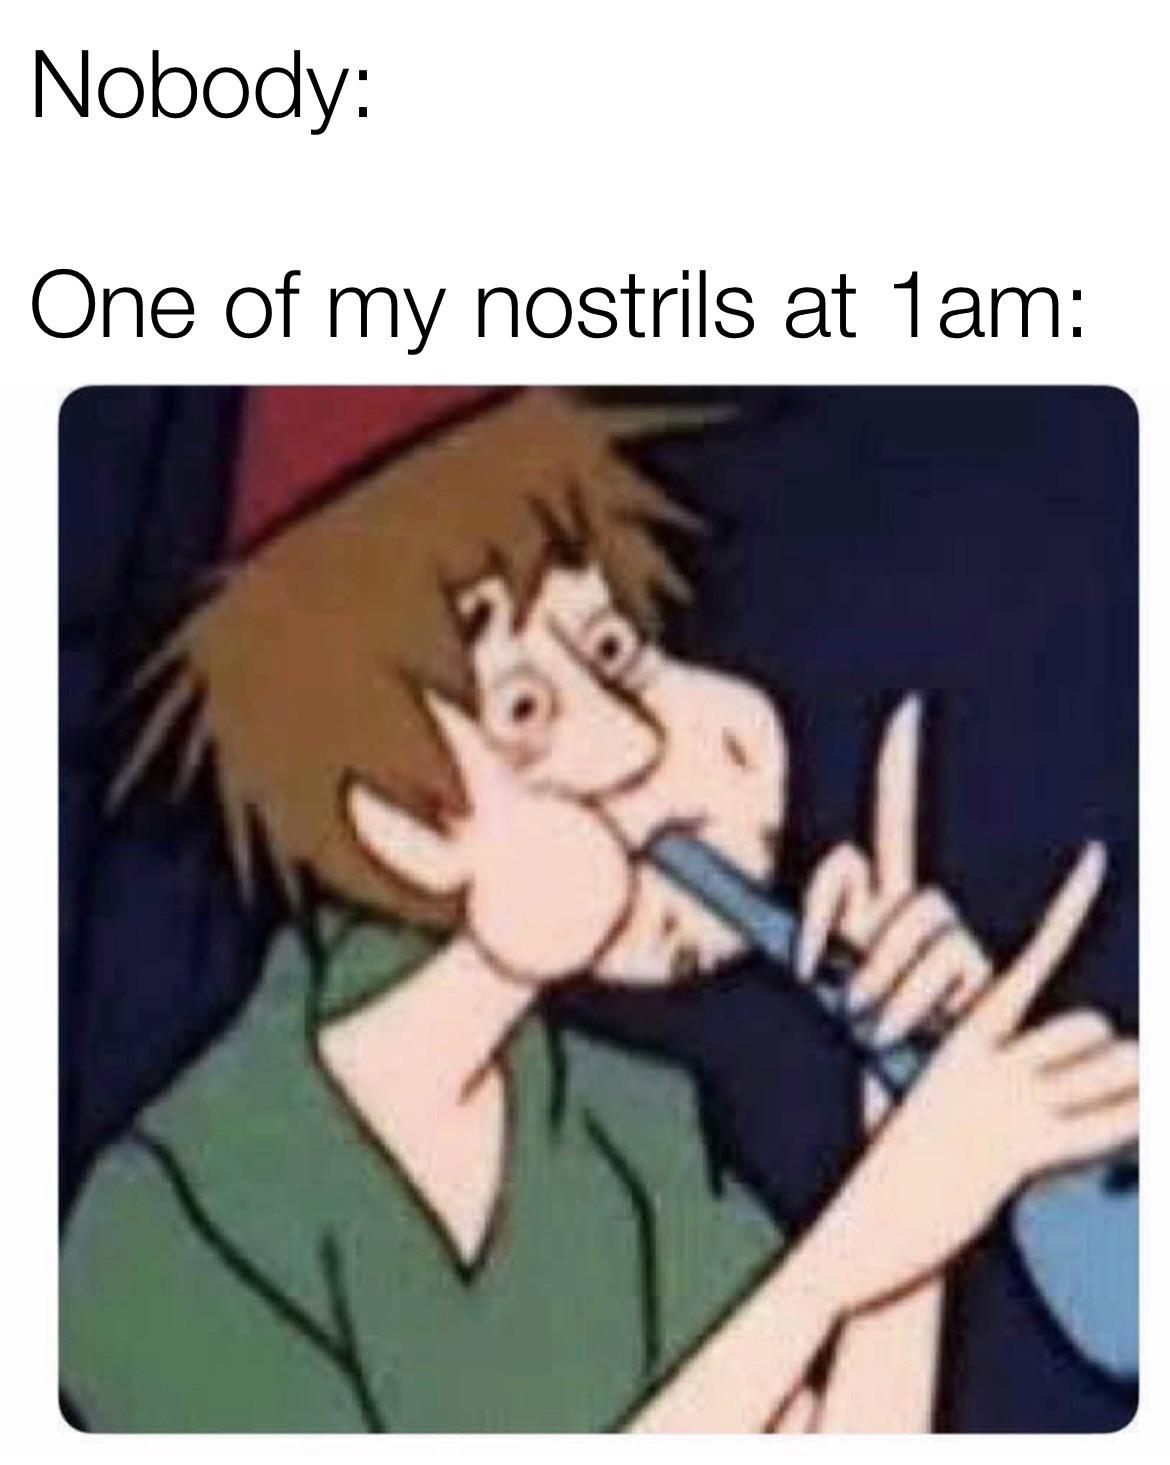 hillbilly anime - Nobody One of my nostrils at 1am